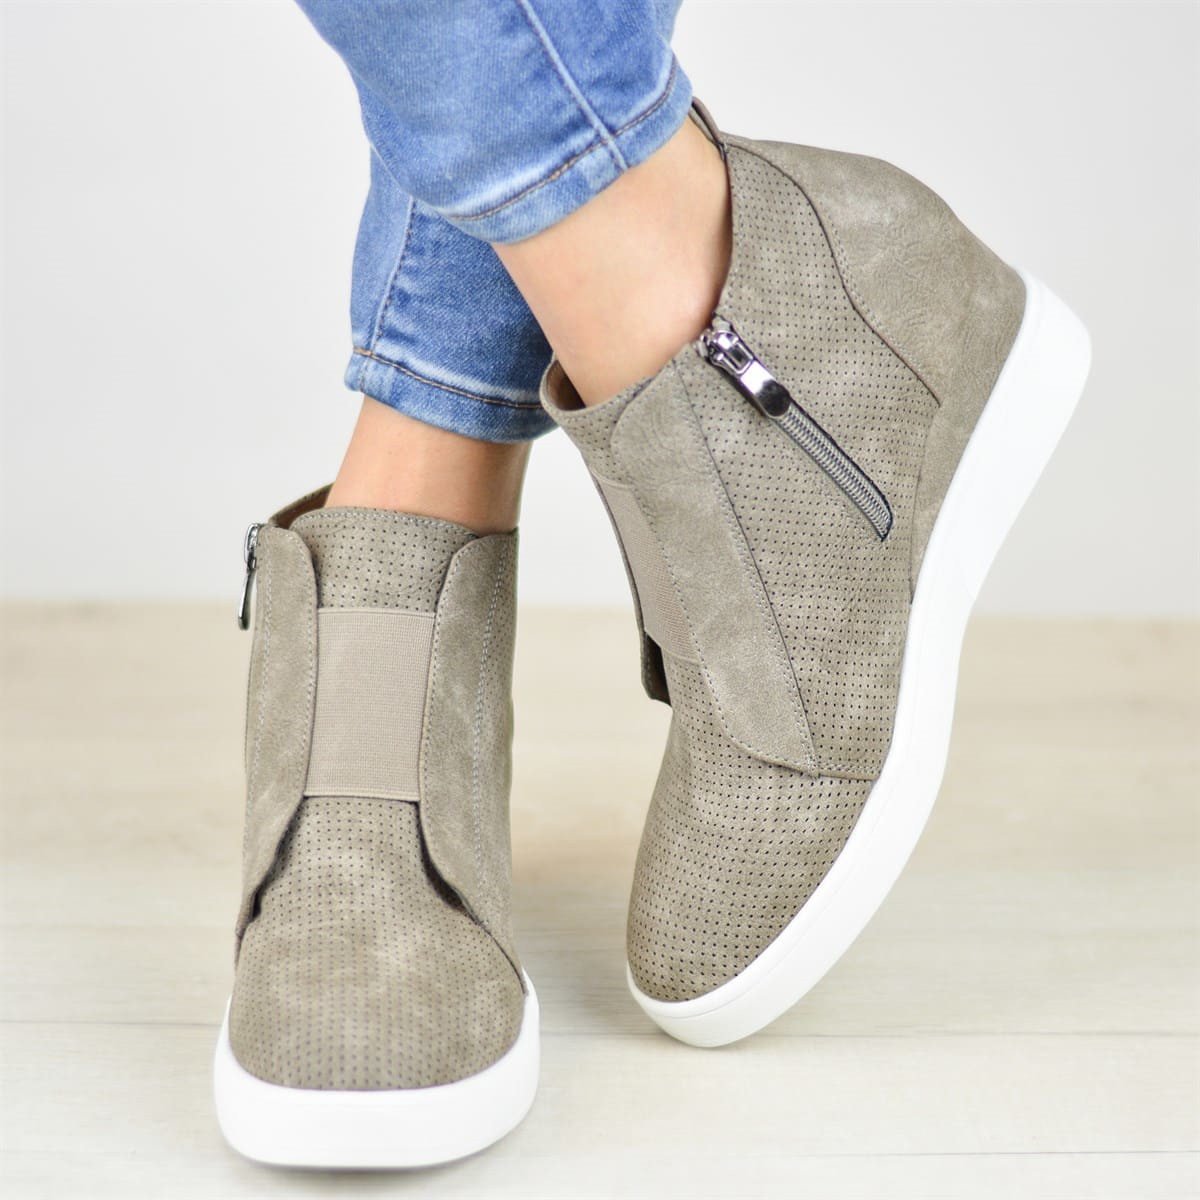 *Comfort Zipper Wedge Sneakers Plus Size Wedges with Side Zipper**